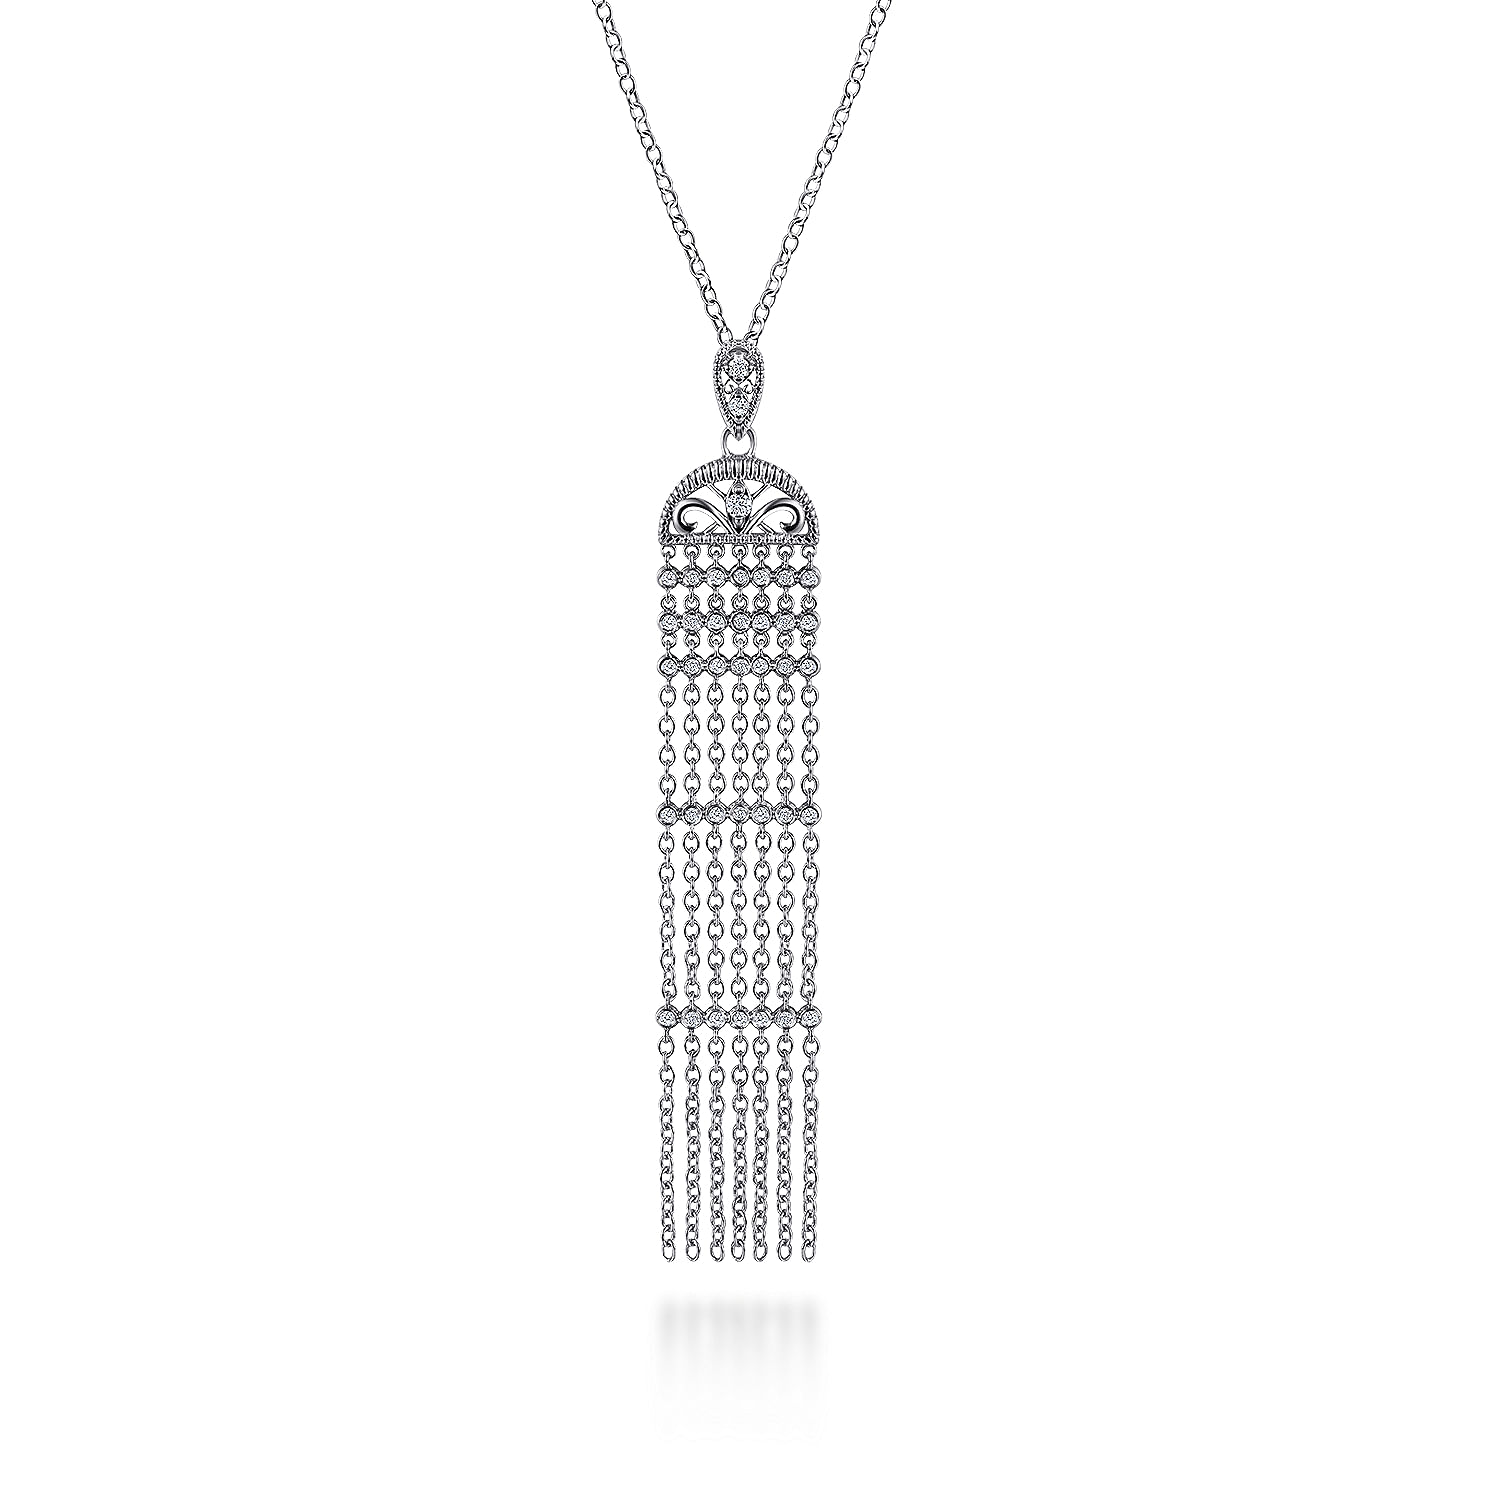 30 inch Vintage Inspired 925 Sterling Silver White Sapphire Fringe Pendant Necklace